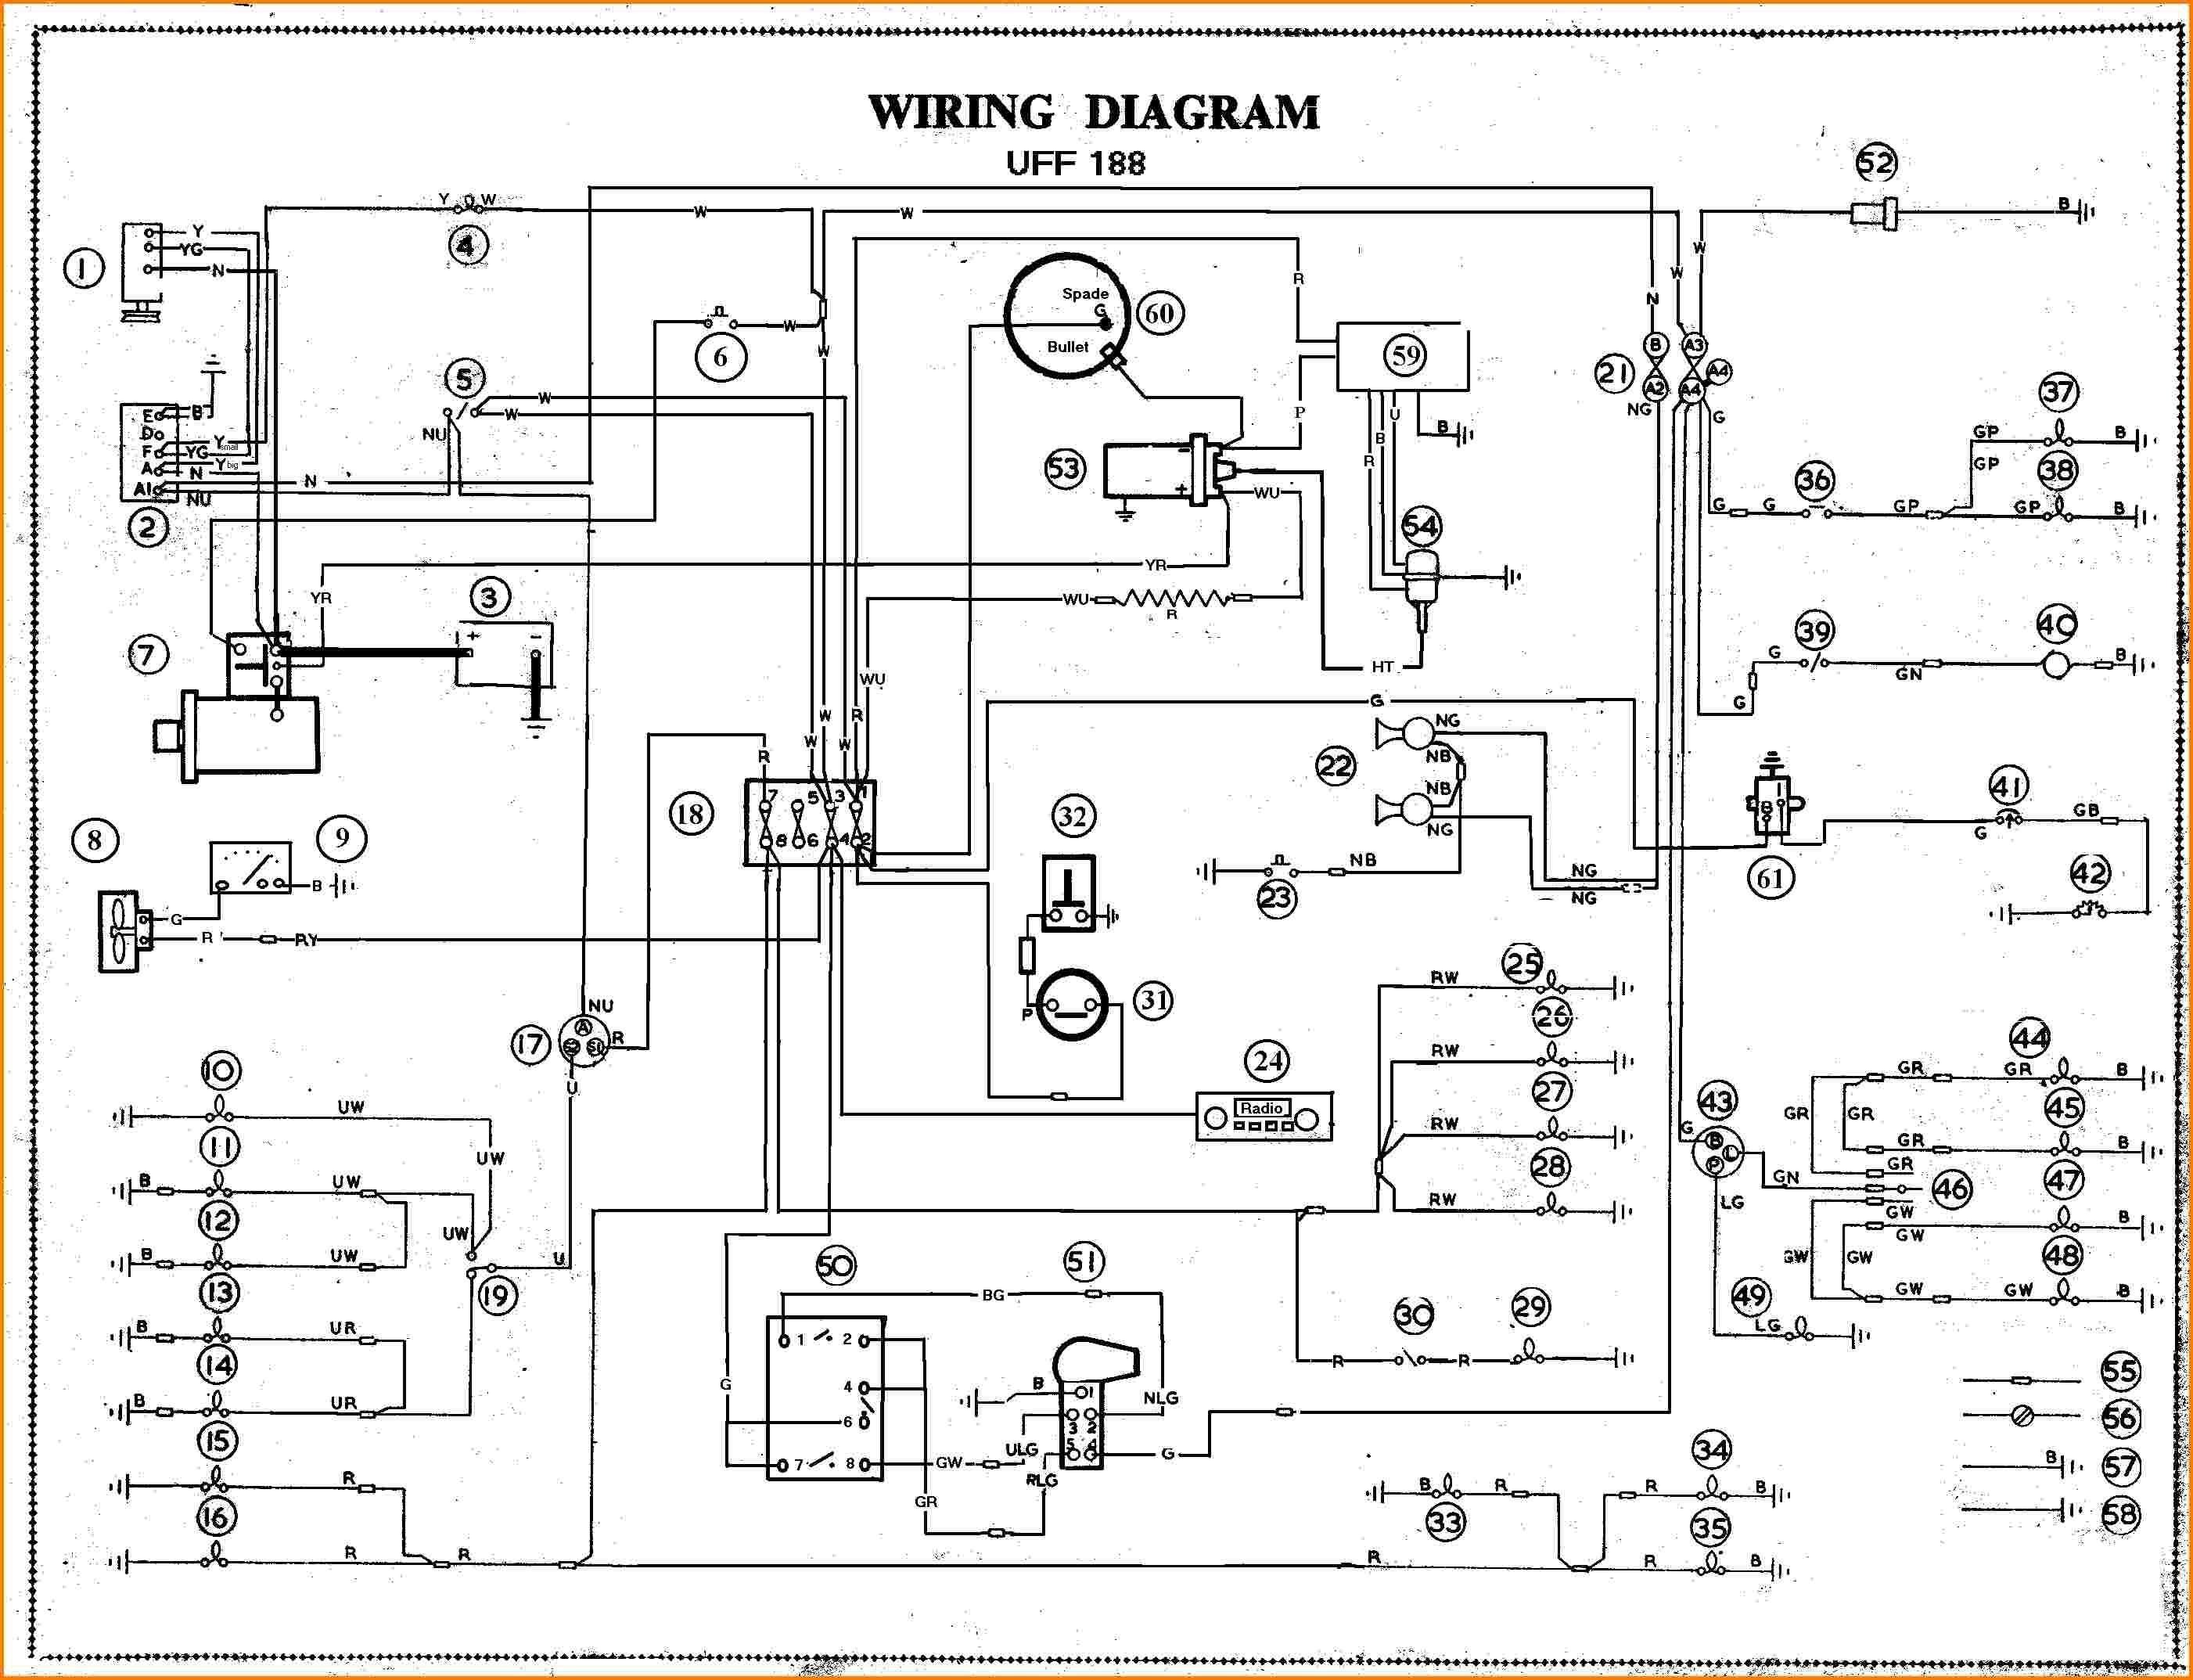 Wiring Diagram for Race Car New iso Wiring Diagram Symbols New Drag Race Car Wiring Diagram